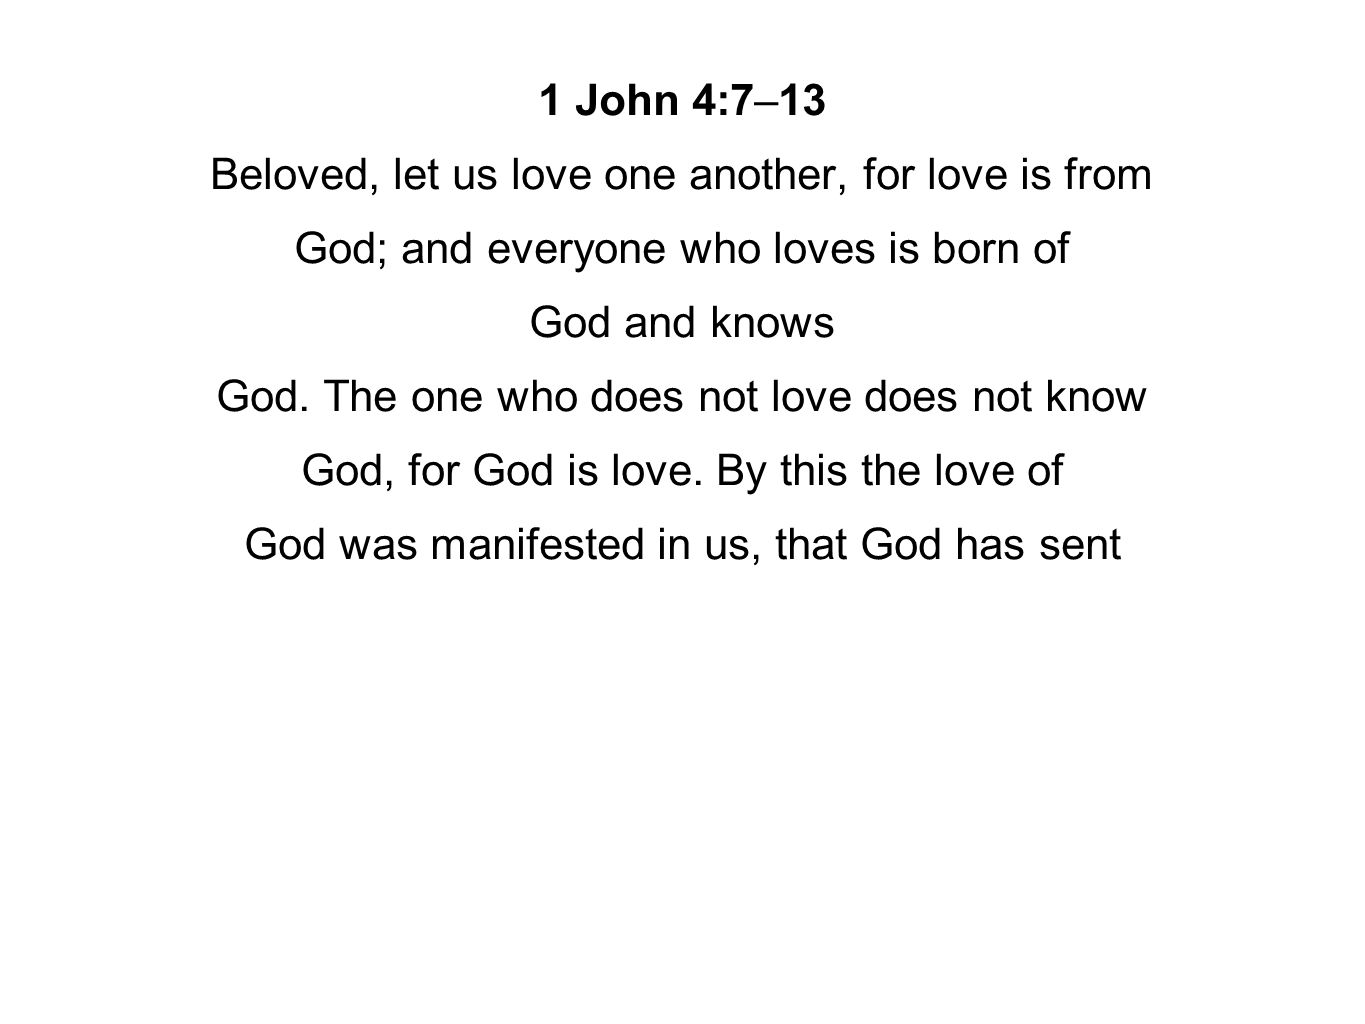 1 John 4:7–13 Beloved, let us love one another, for love is from God; and everyone who loves is born of God and knows God.